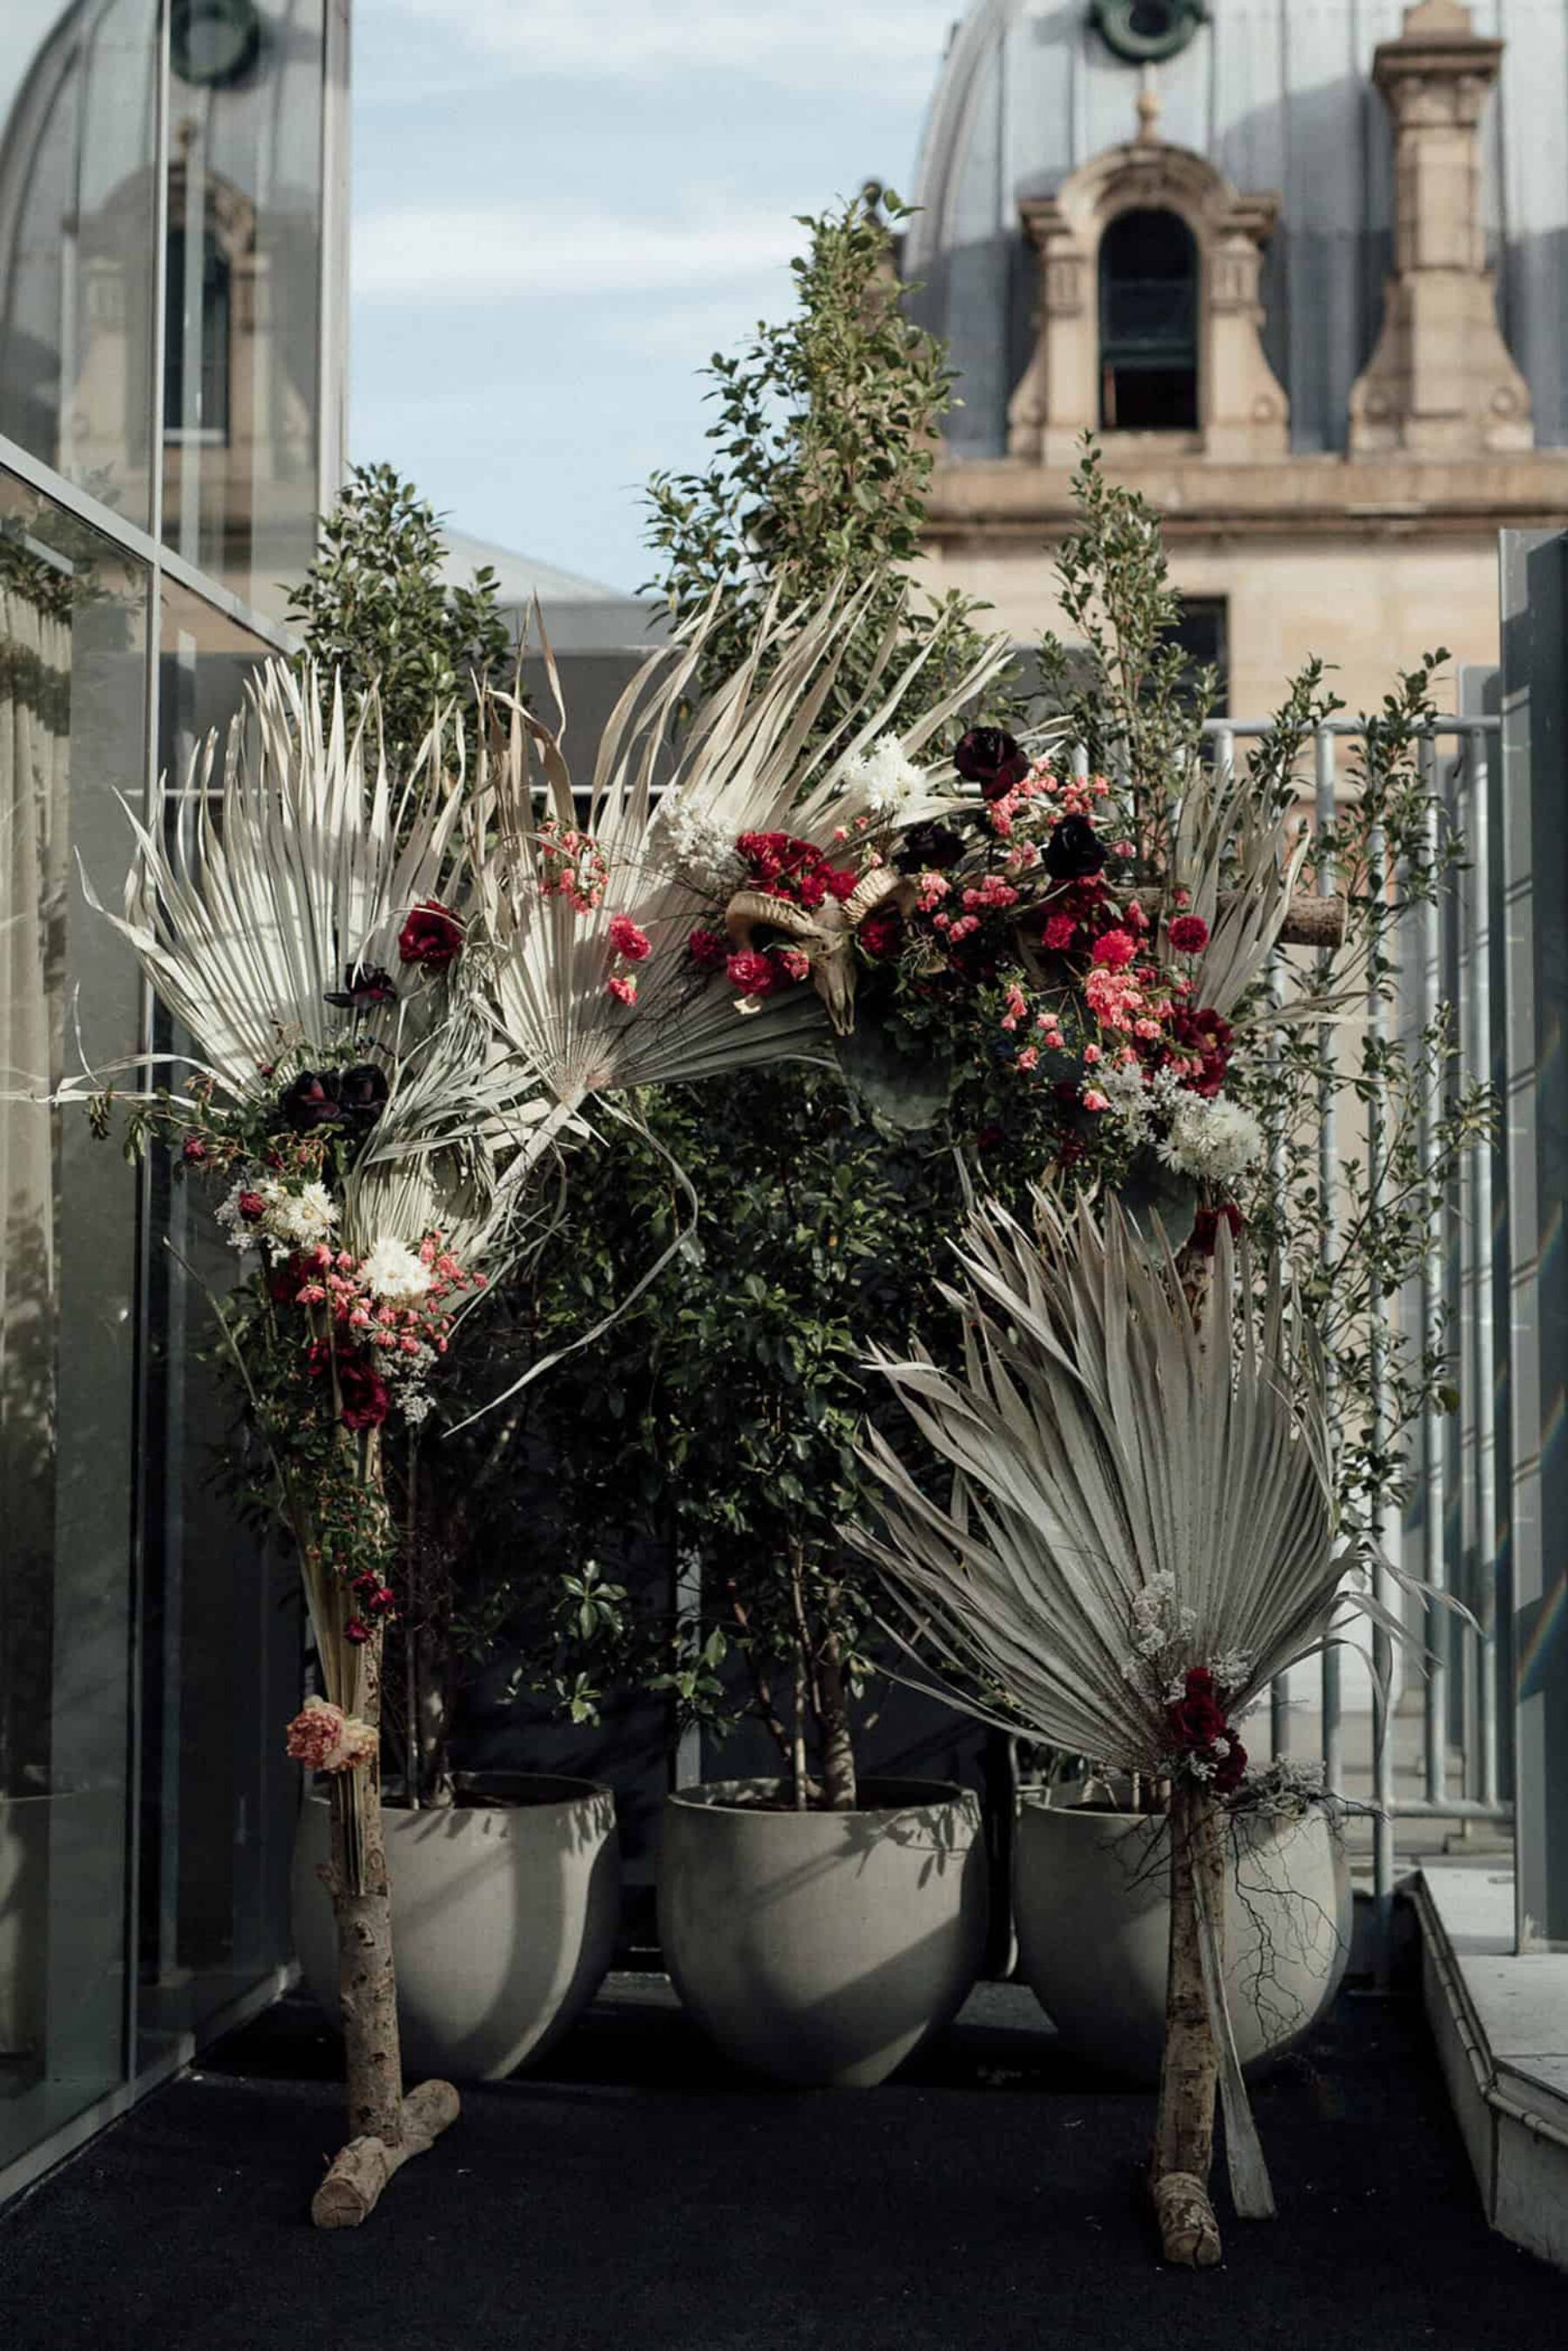 structural floral arbour with dried palms